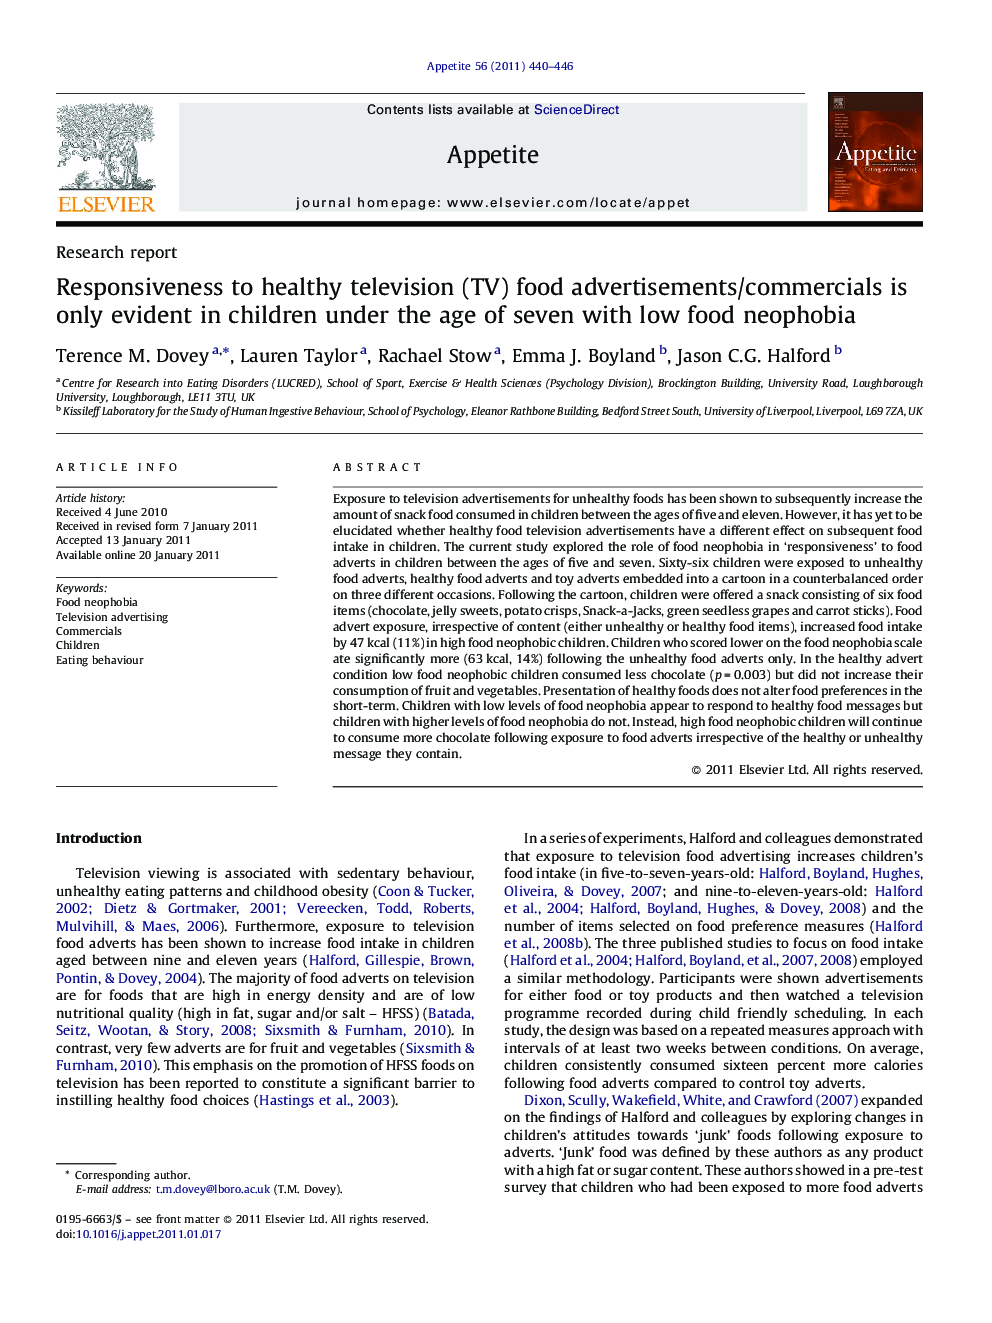 Responsiveness to healthy television (TV) food advertisements/commercials is only evident in children under the age of seven with low food neophobia